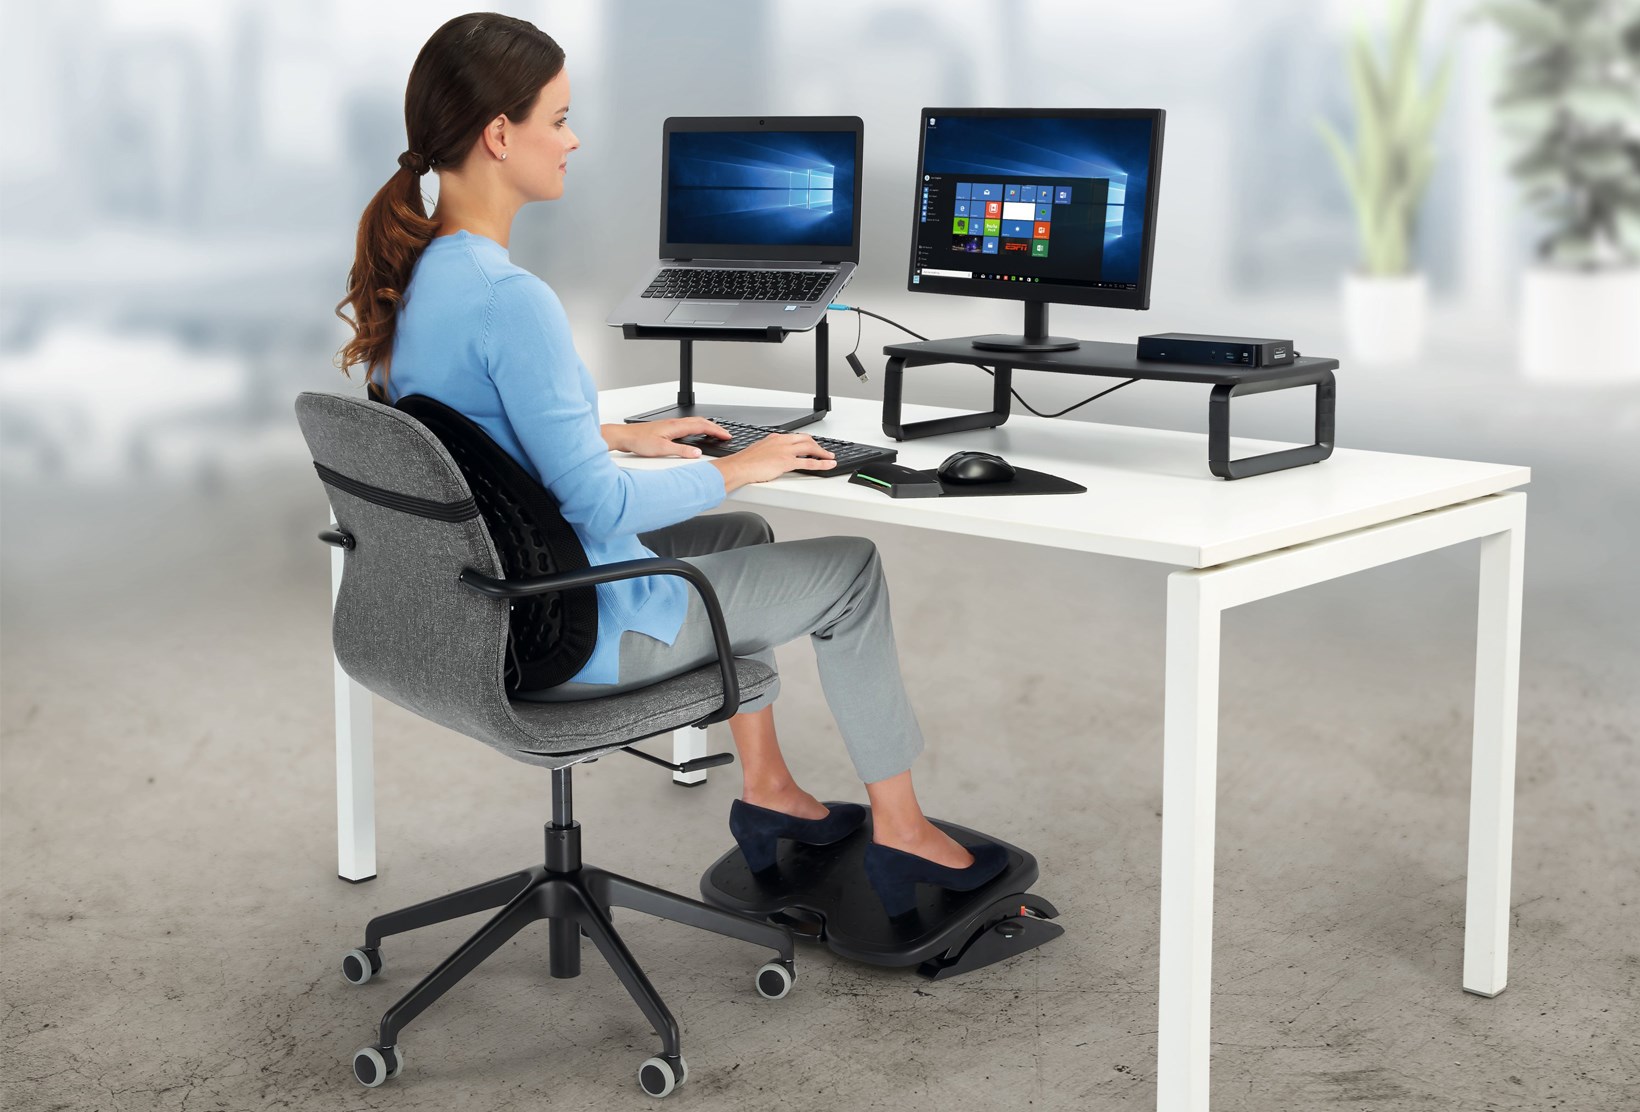 Woman working at a desktop with a monitor and Kensington ergonomic products